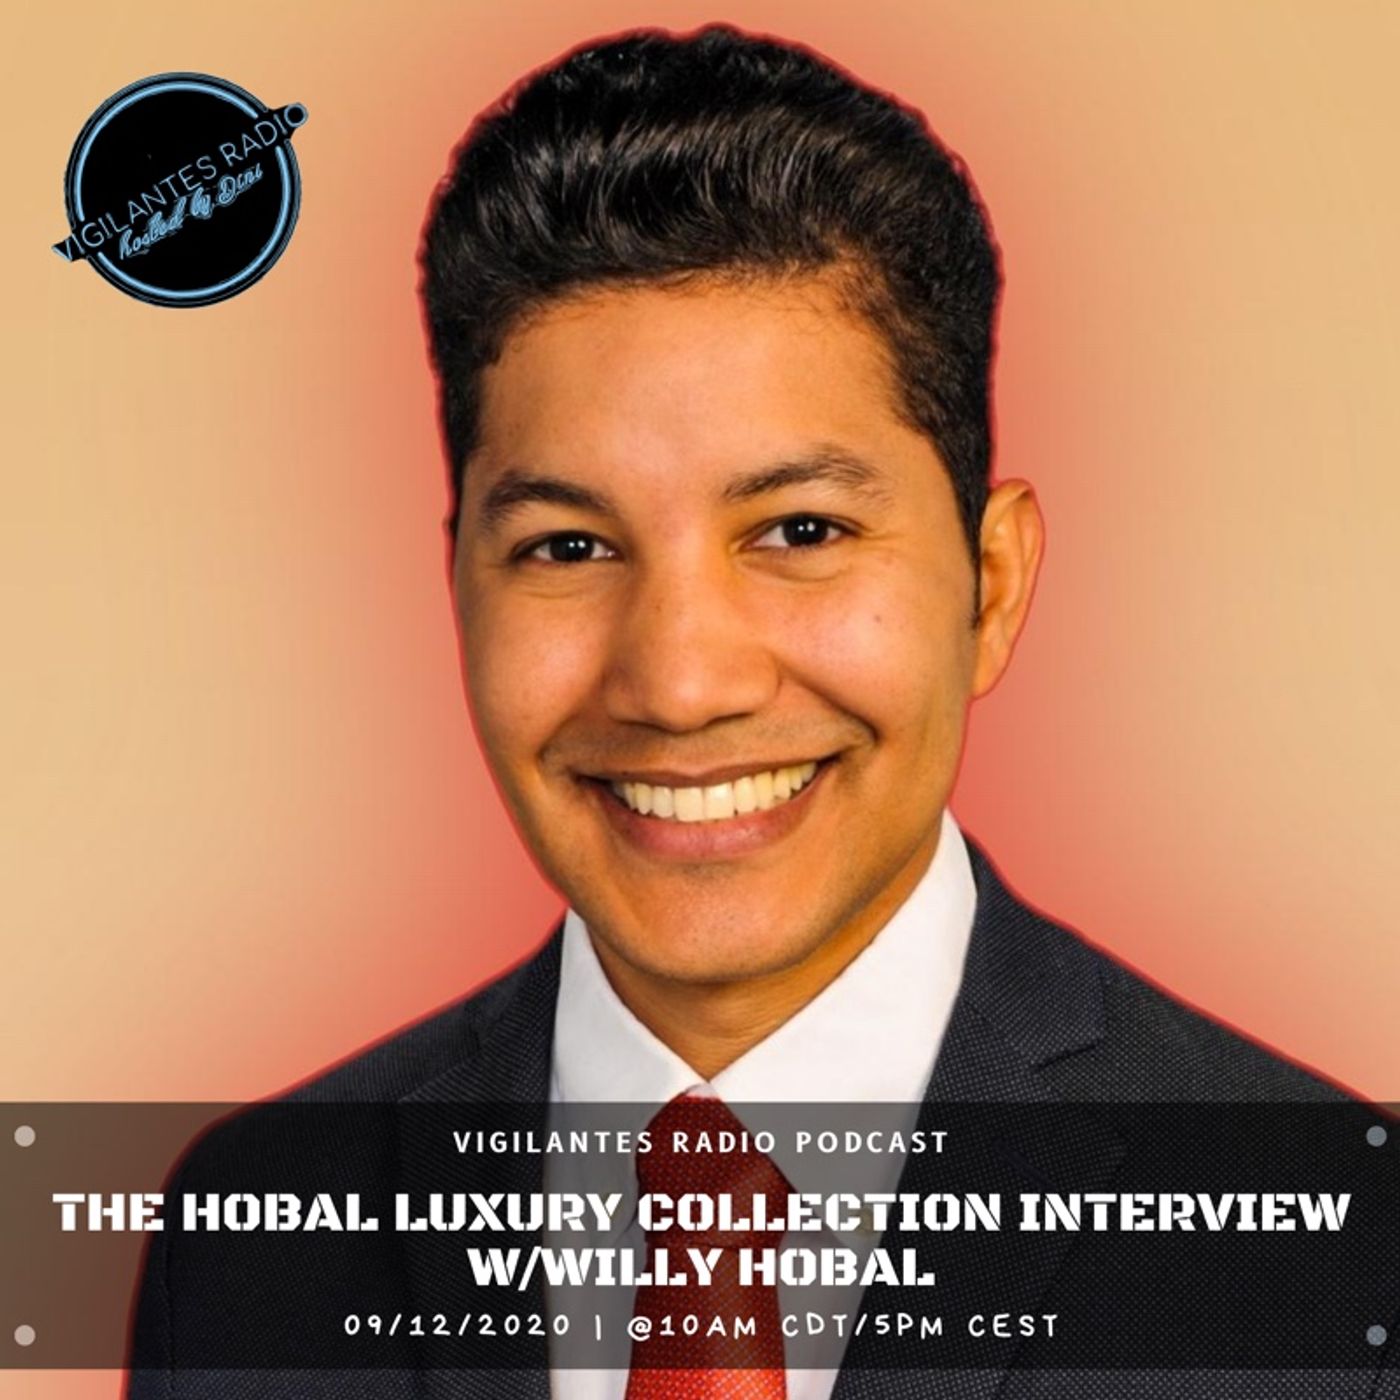 The Hobal Luxury Collection Interview w/Willy Hobal.